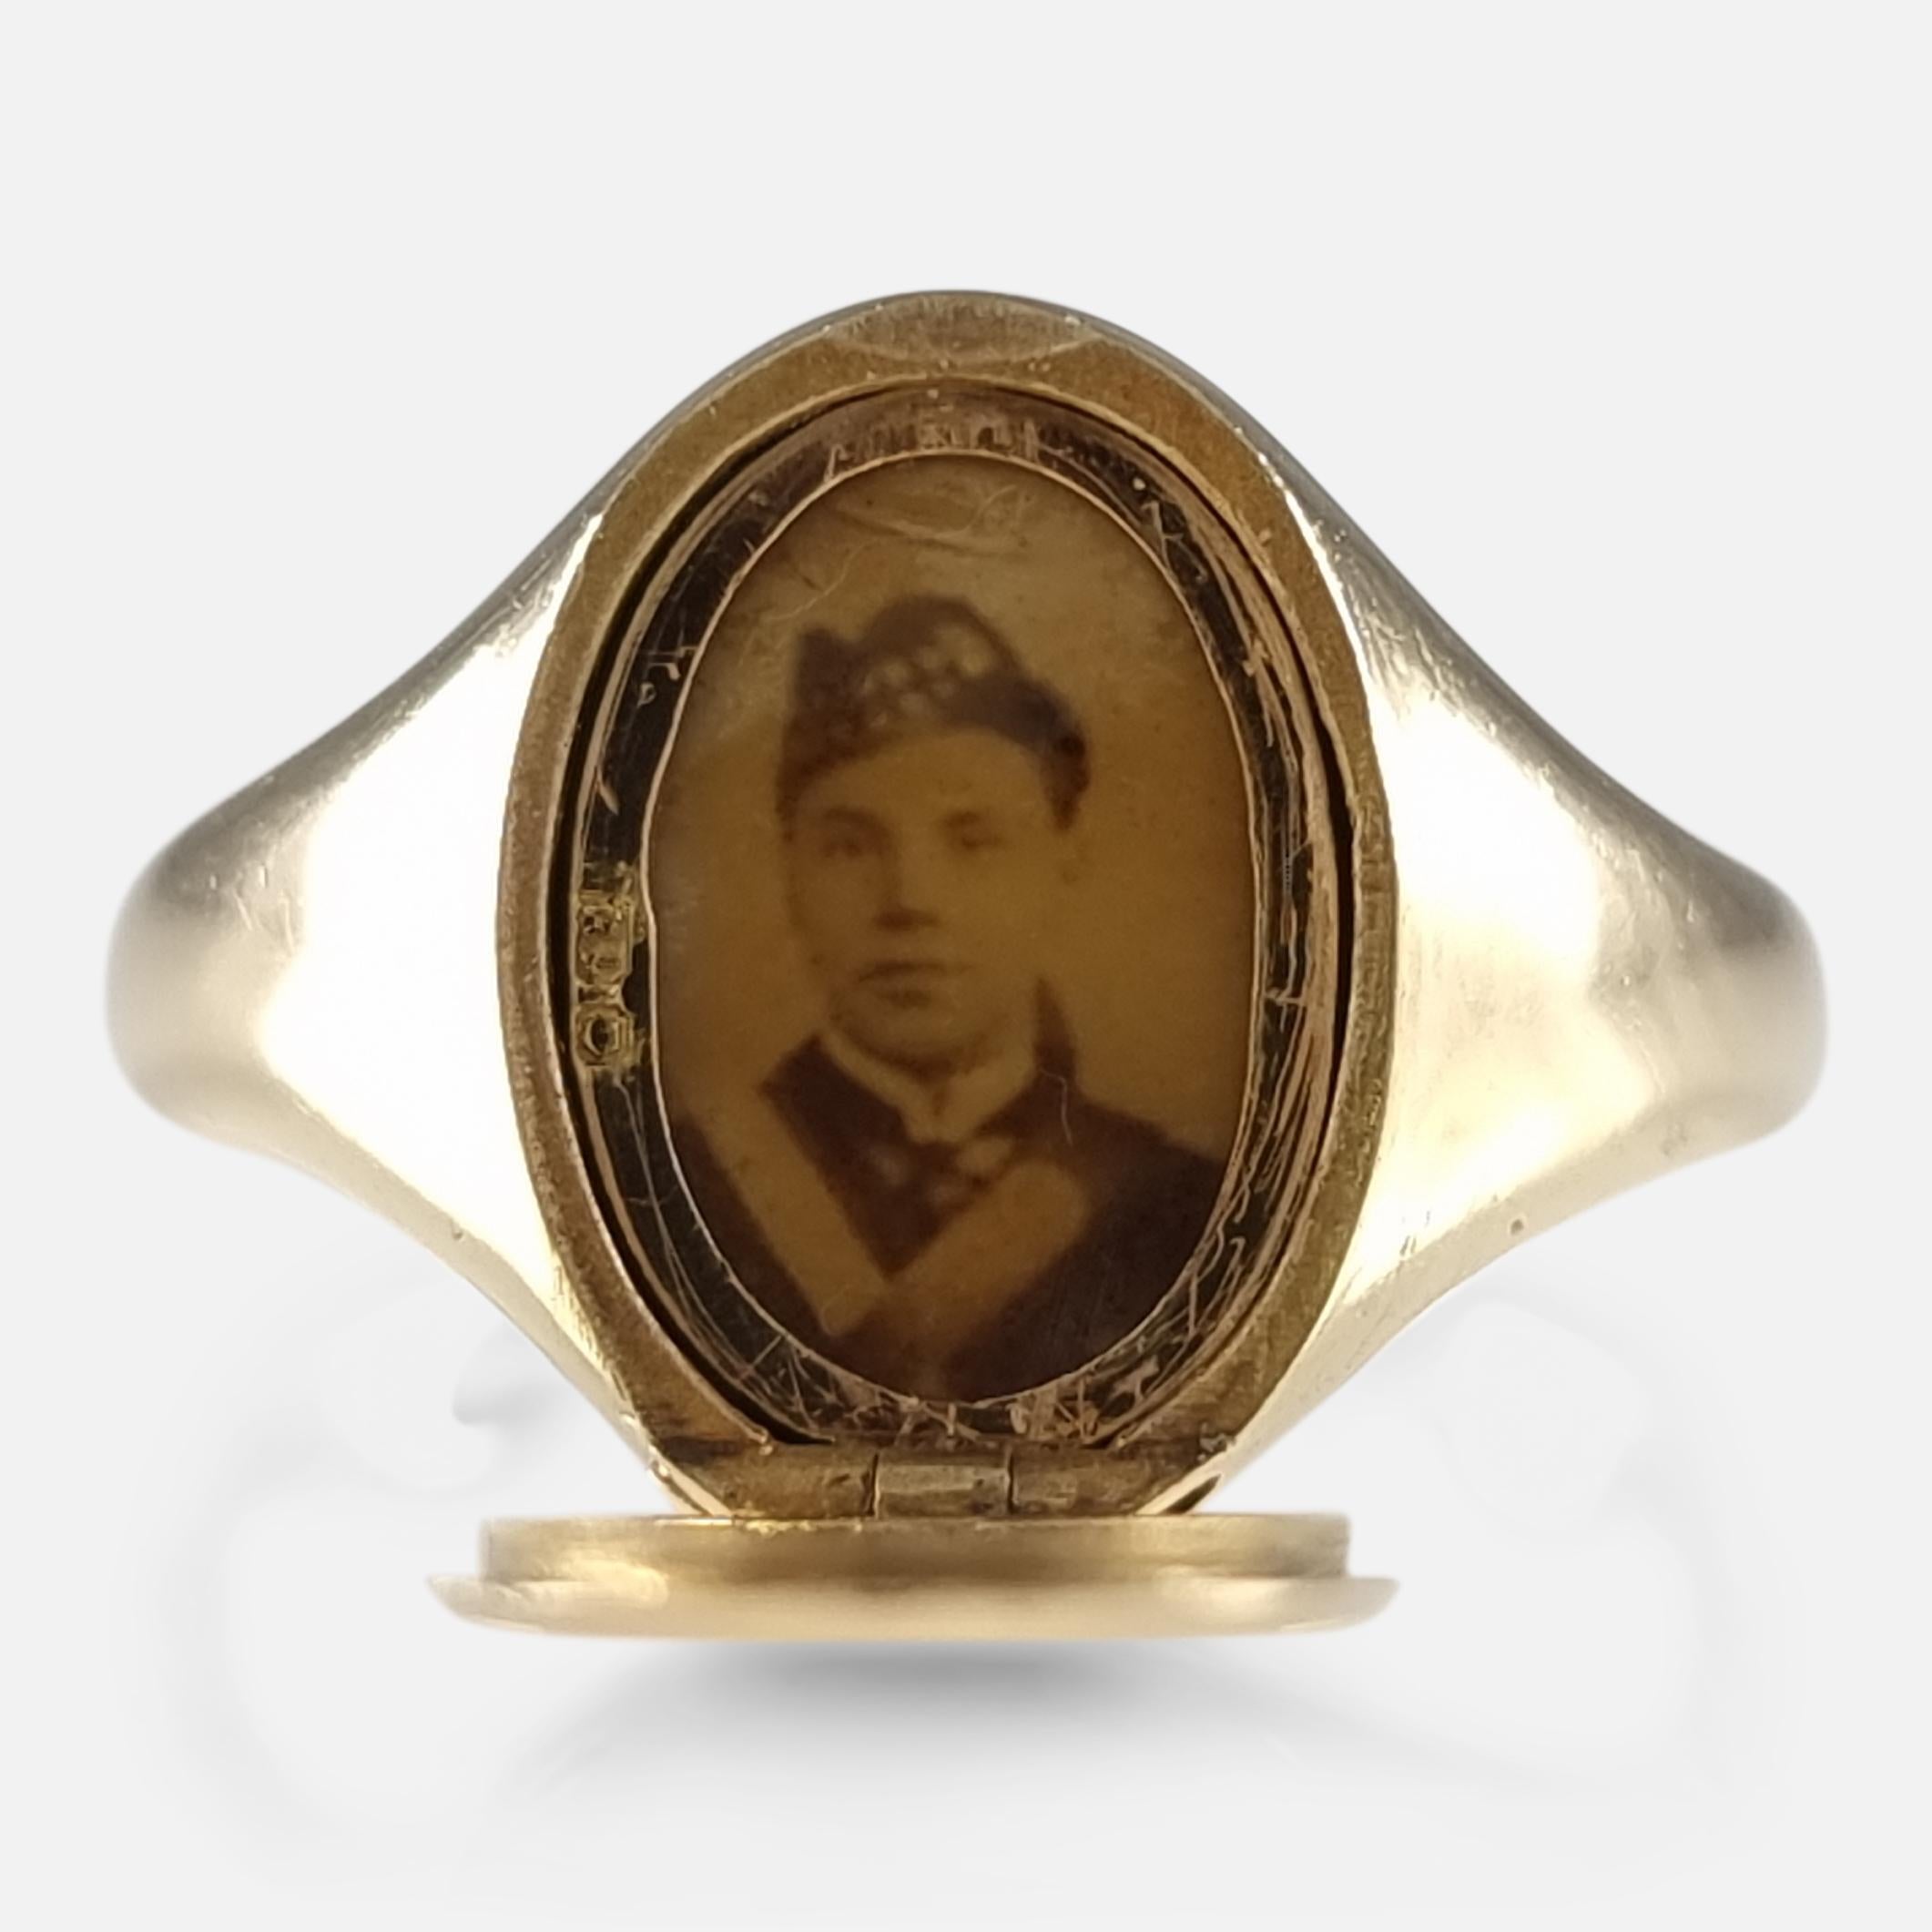 A George V 18 carat yellow gold portrait locket signet ring. The ring has an oval panel to the front engraved with The King's Royal Rifle Corps emblem, which hinges open to reveal a portrait of a gentleman in military uniform; leading to plain